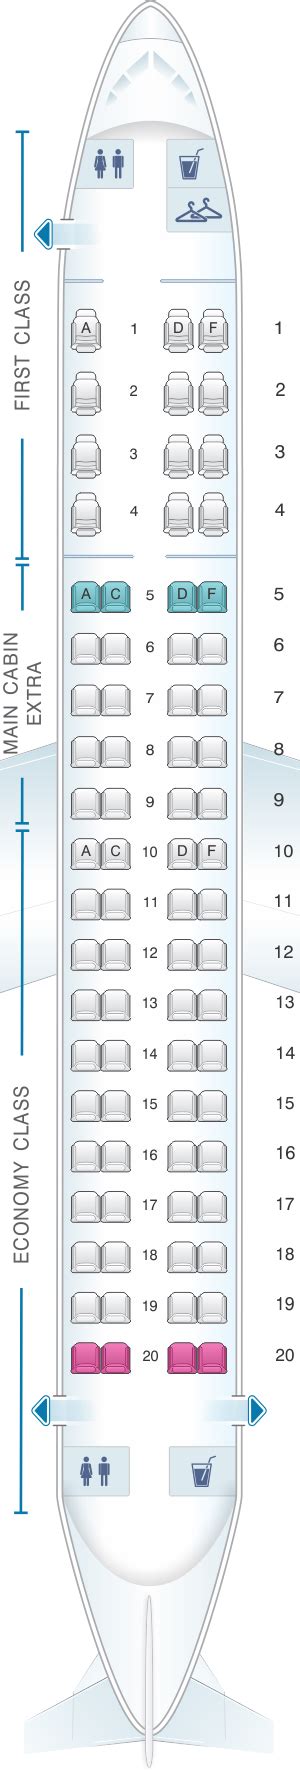 Embraer 175 american airlines seat map. American Airlines Embraer 175 Seat Map; Seat 8c; American Airlines Reviews. Seating Charts · Airbus A319 · Airbus A319 (MCE) · Airbus A320 · Airbus A321 · Airbus A321 (transcon) · Airbus A321 (US Airways) · Airbus A330-200 · Airbus A330-300 · Boeing 737 MAX 8 · Boeing 737-800 · Boeing 737-800 (New MCE) · Boeing 757-200 · Boeing 757 ... 